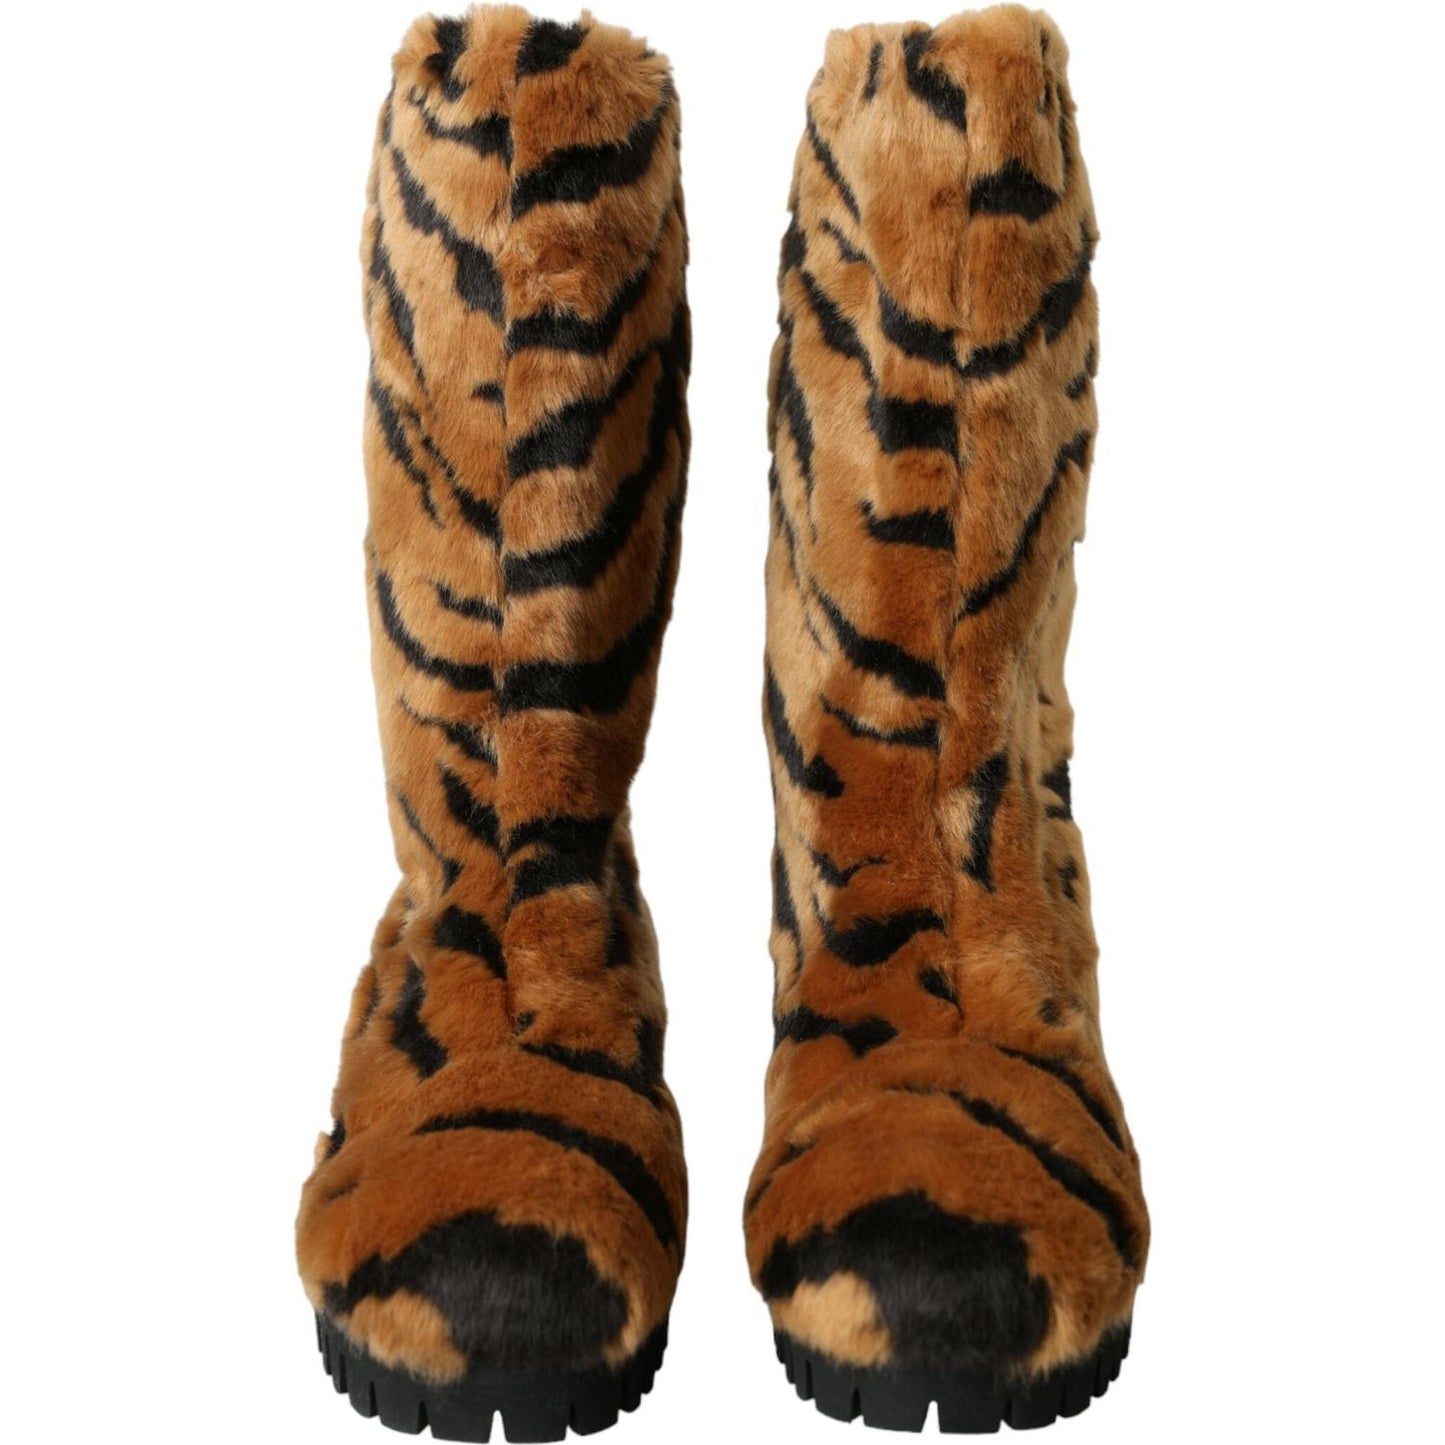 Dolce & Gabbana Brown Tiger Fur Leather Mid Calf Boots Shoes brown-tiger-fur-leather-mid-calf-boots-shoes